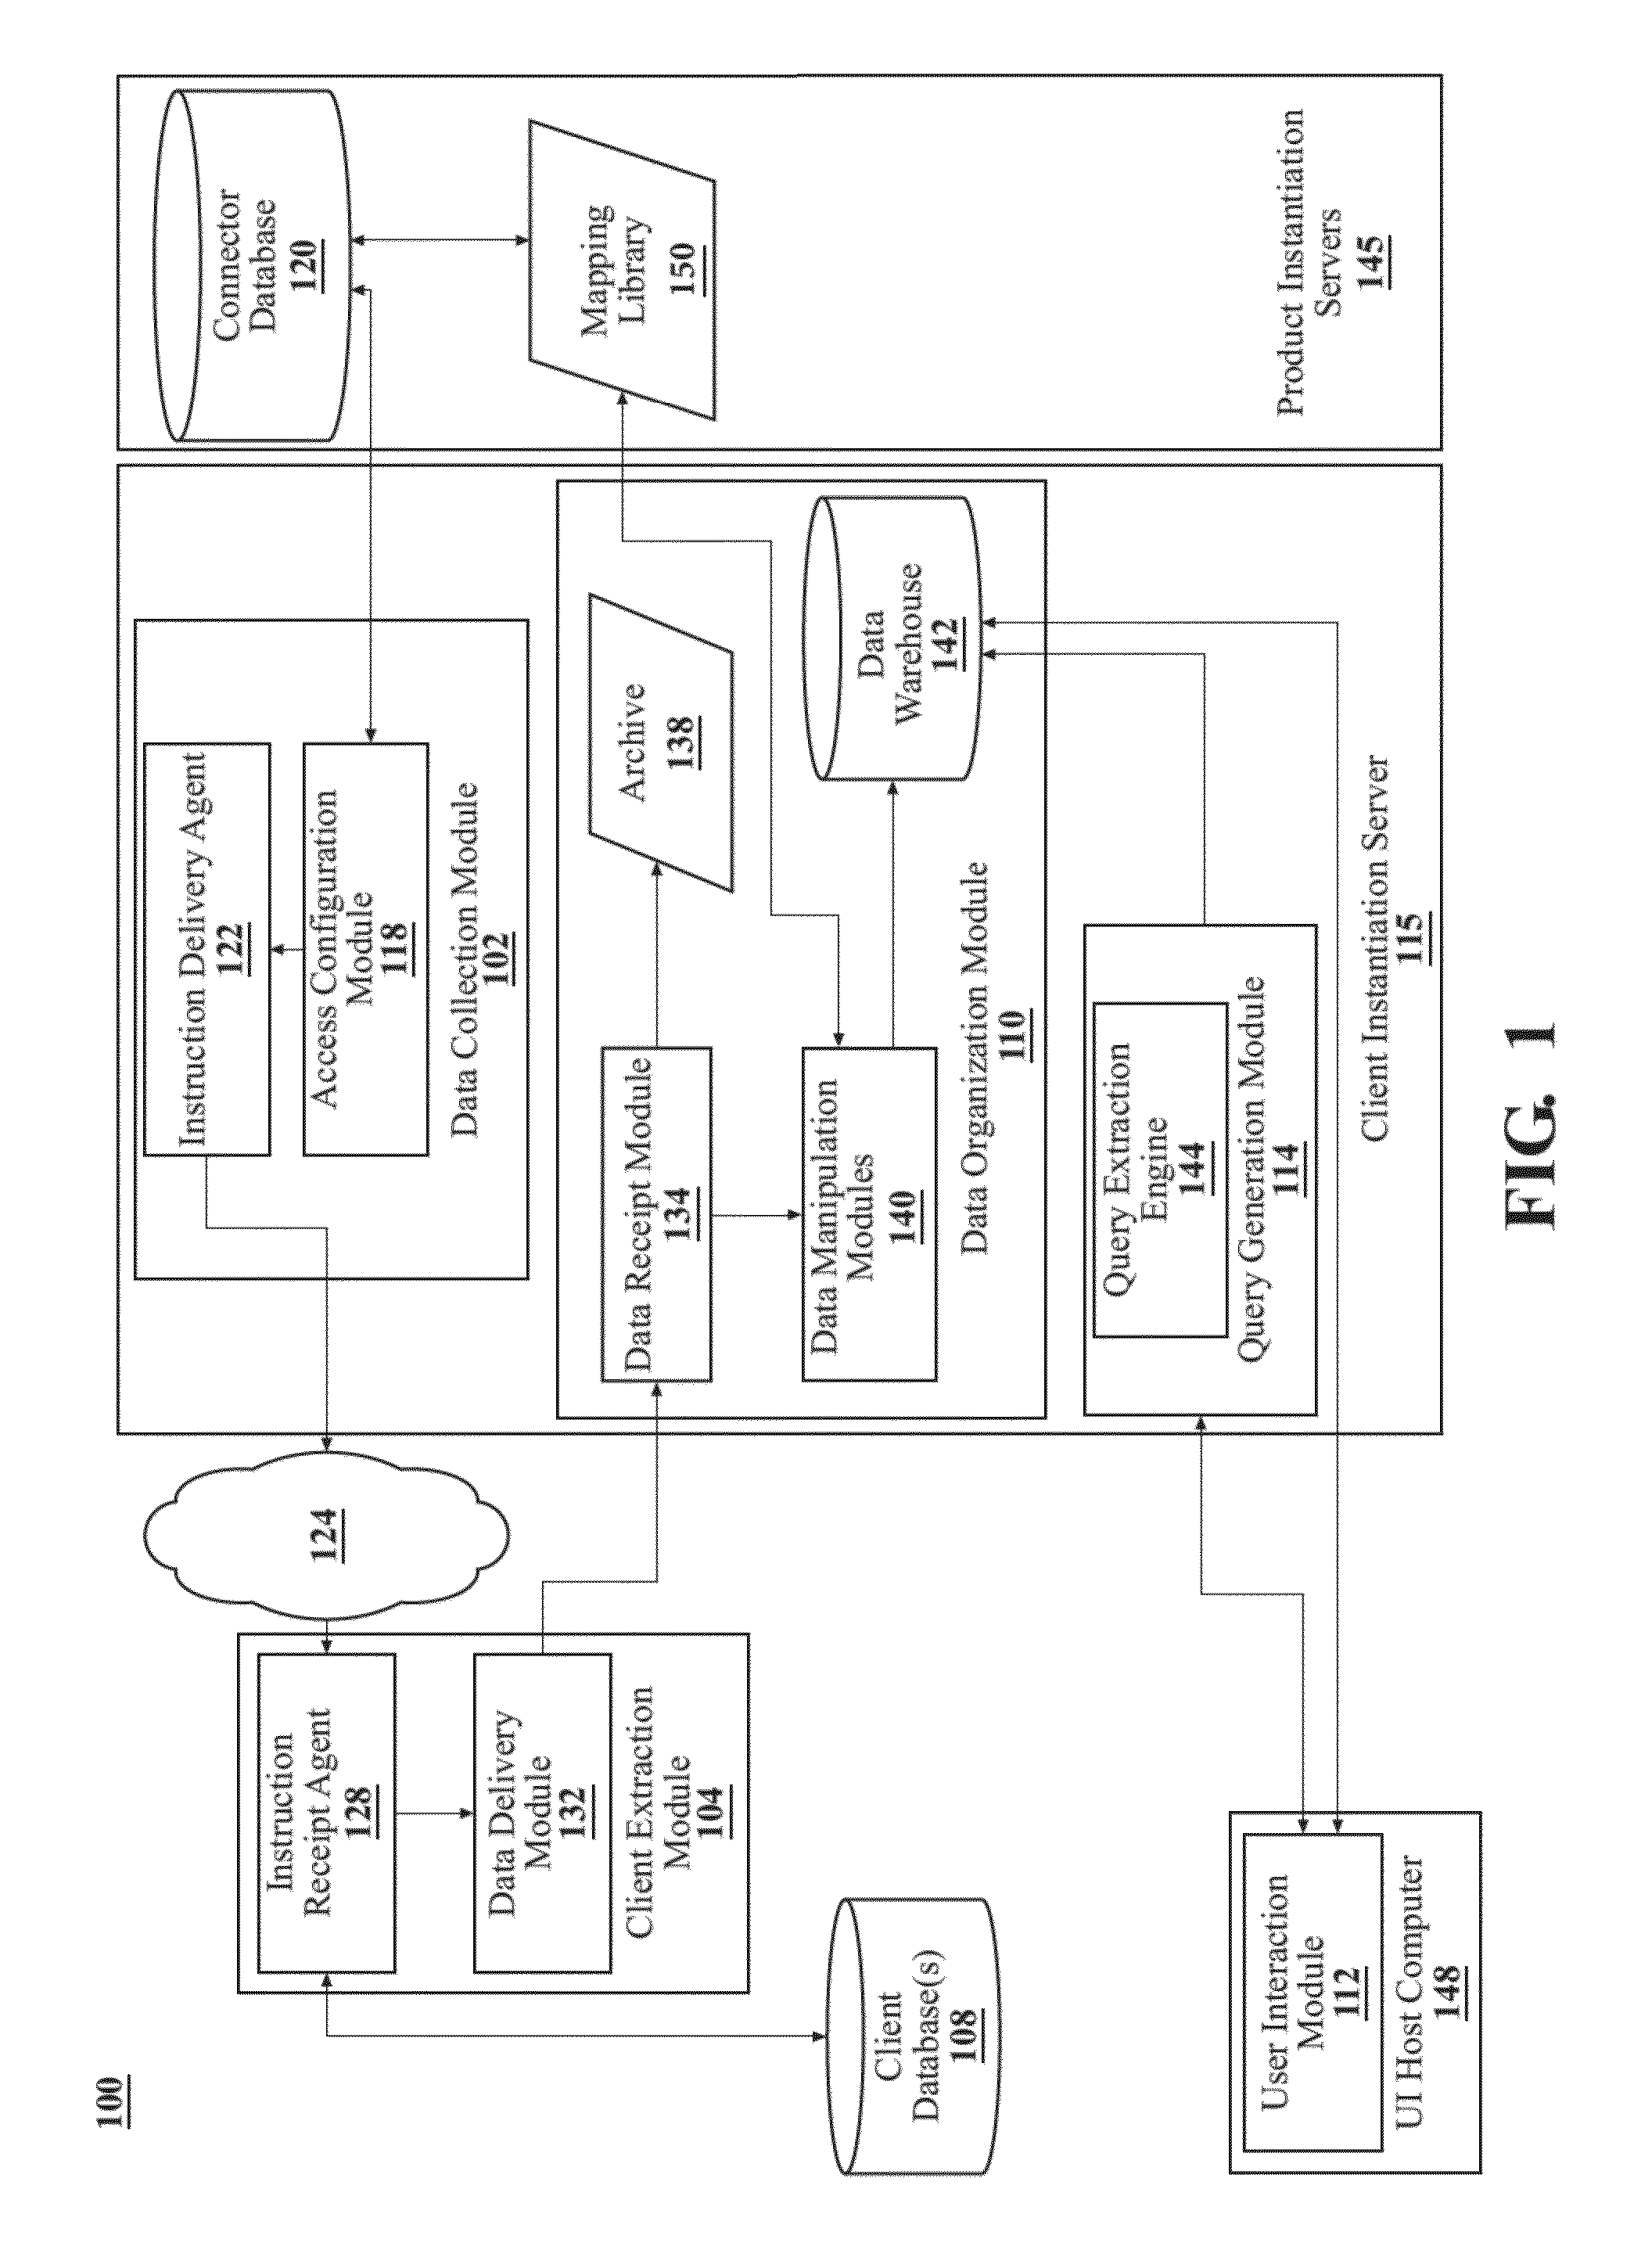 Systems and methods for electronic health records